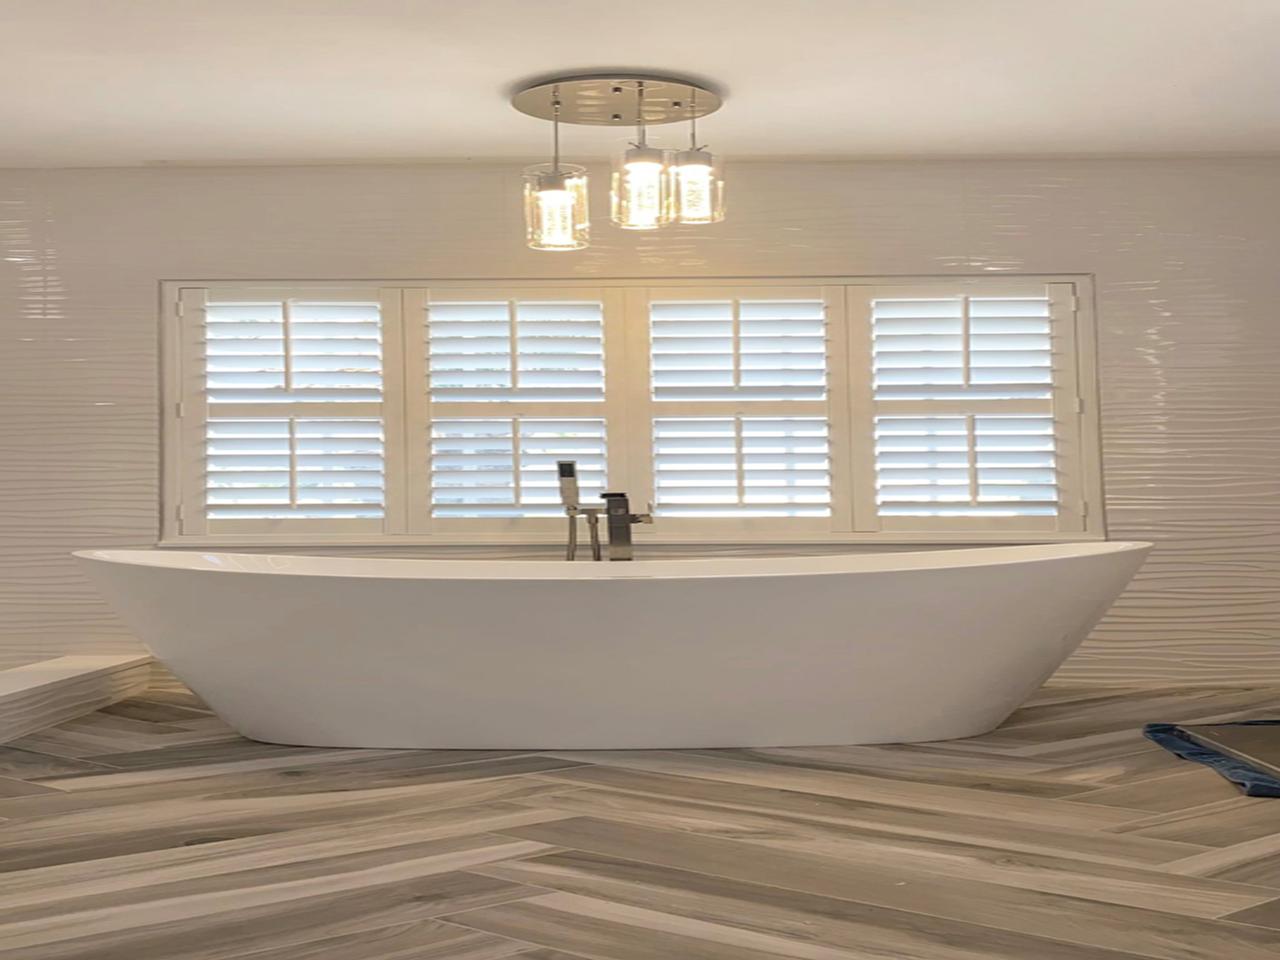 Bathroom with interior shutters